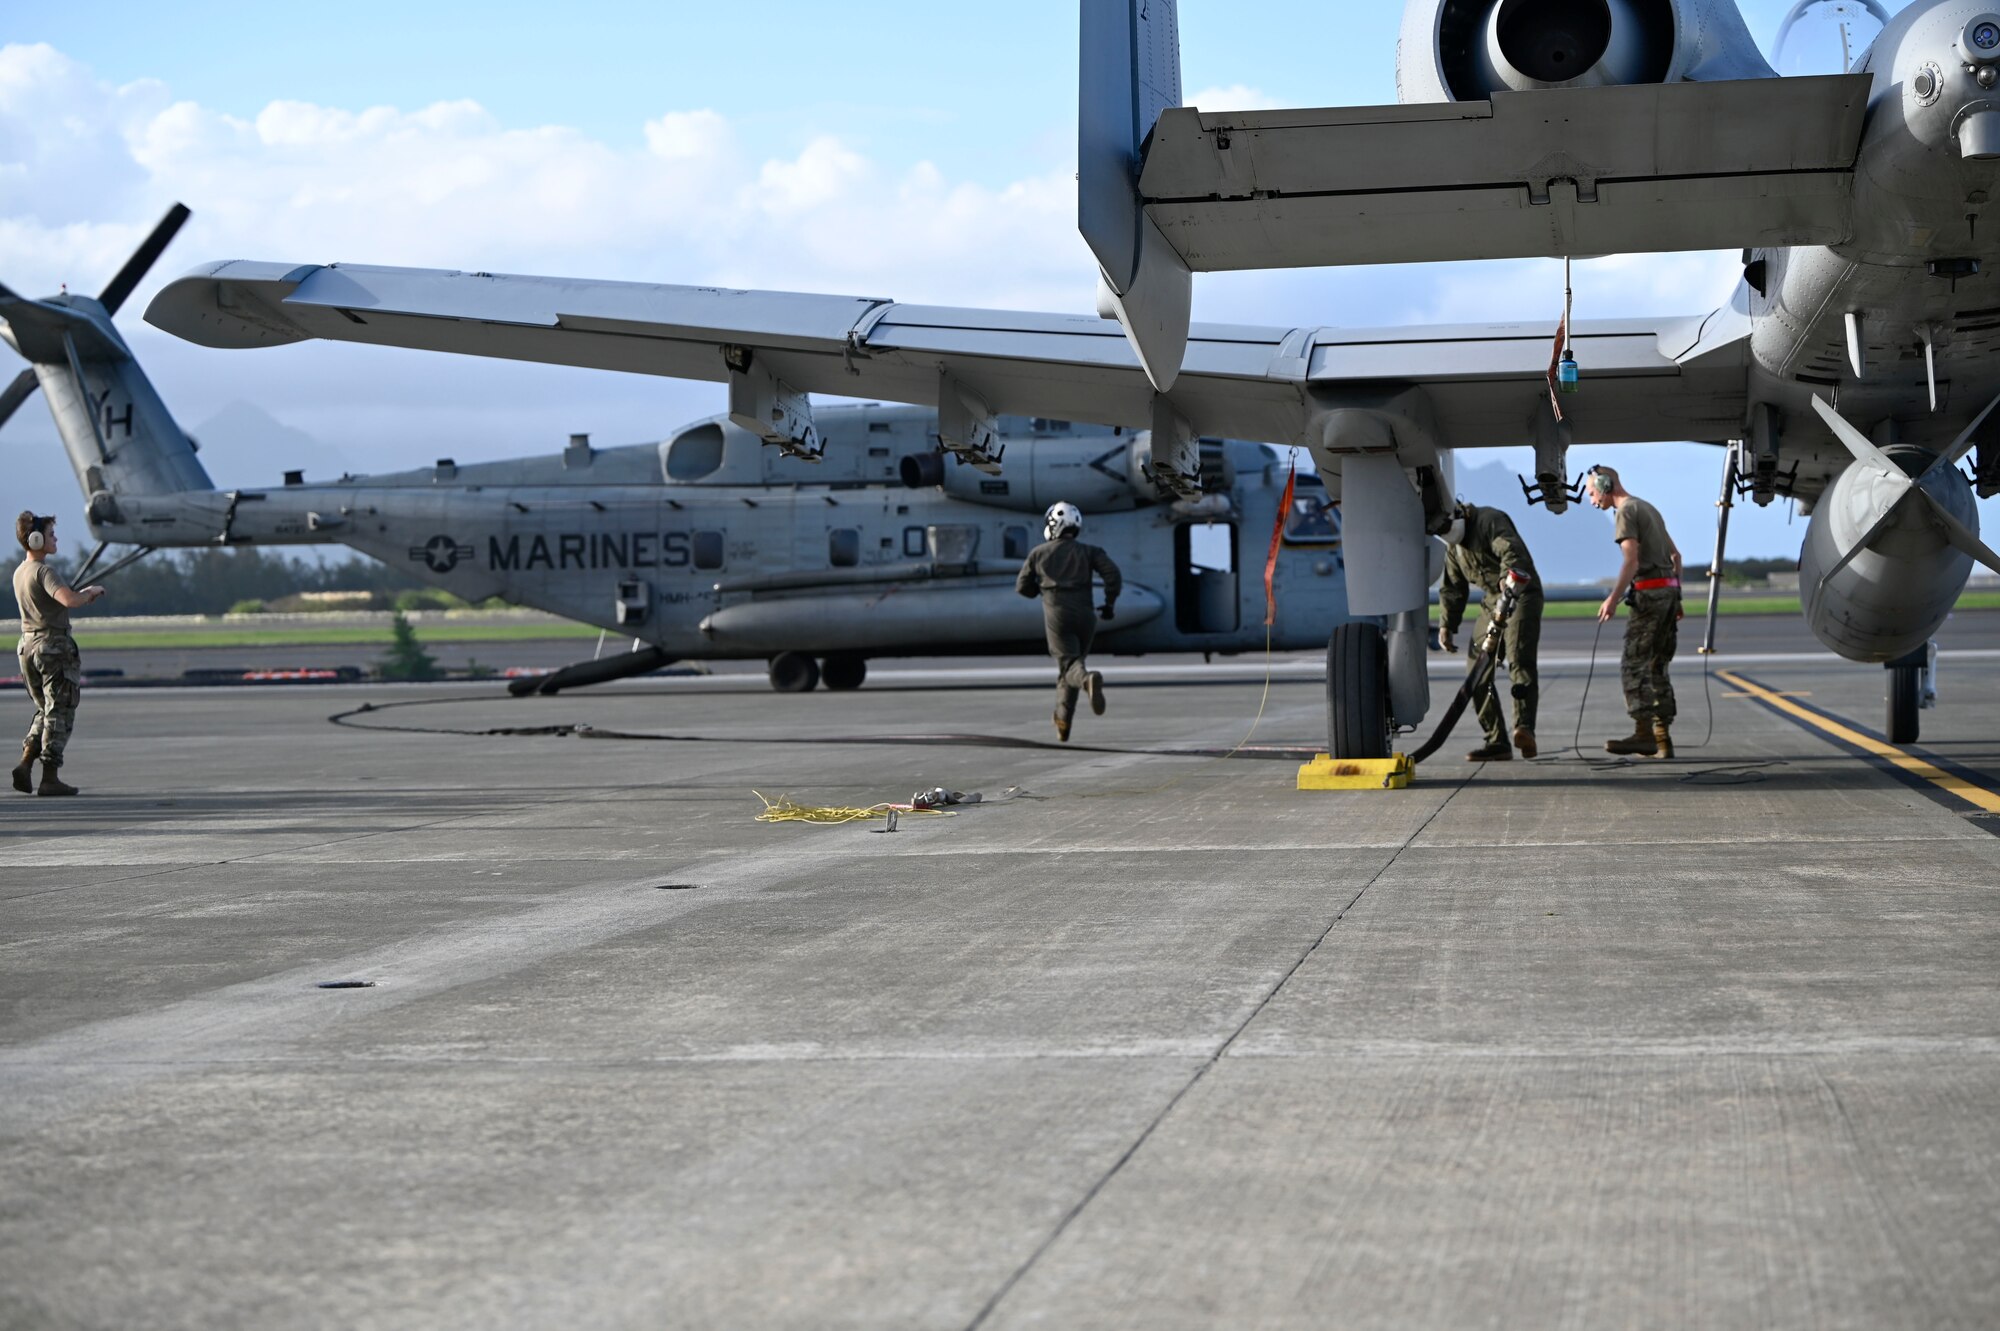 A Marine Corps Forward Area Refueling Point team practices aviation-delivered ground refueling (ADGR) from a CH-53 to A-10s during Exercise KANI WILDCAT. ADGR is frequently used for aircraft when unable to refuel in flight and/or to keep the aircraft closer to the fight.